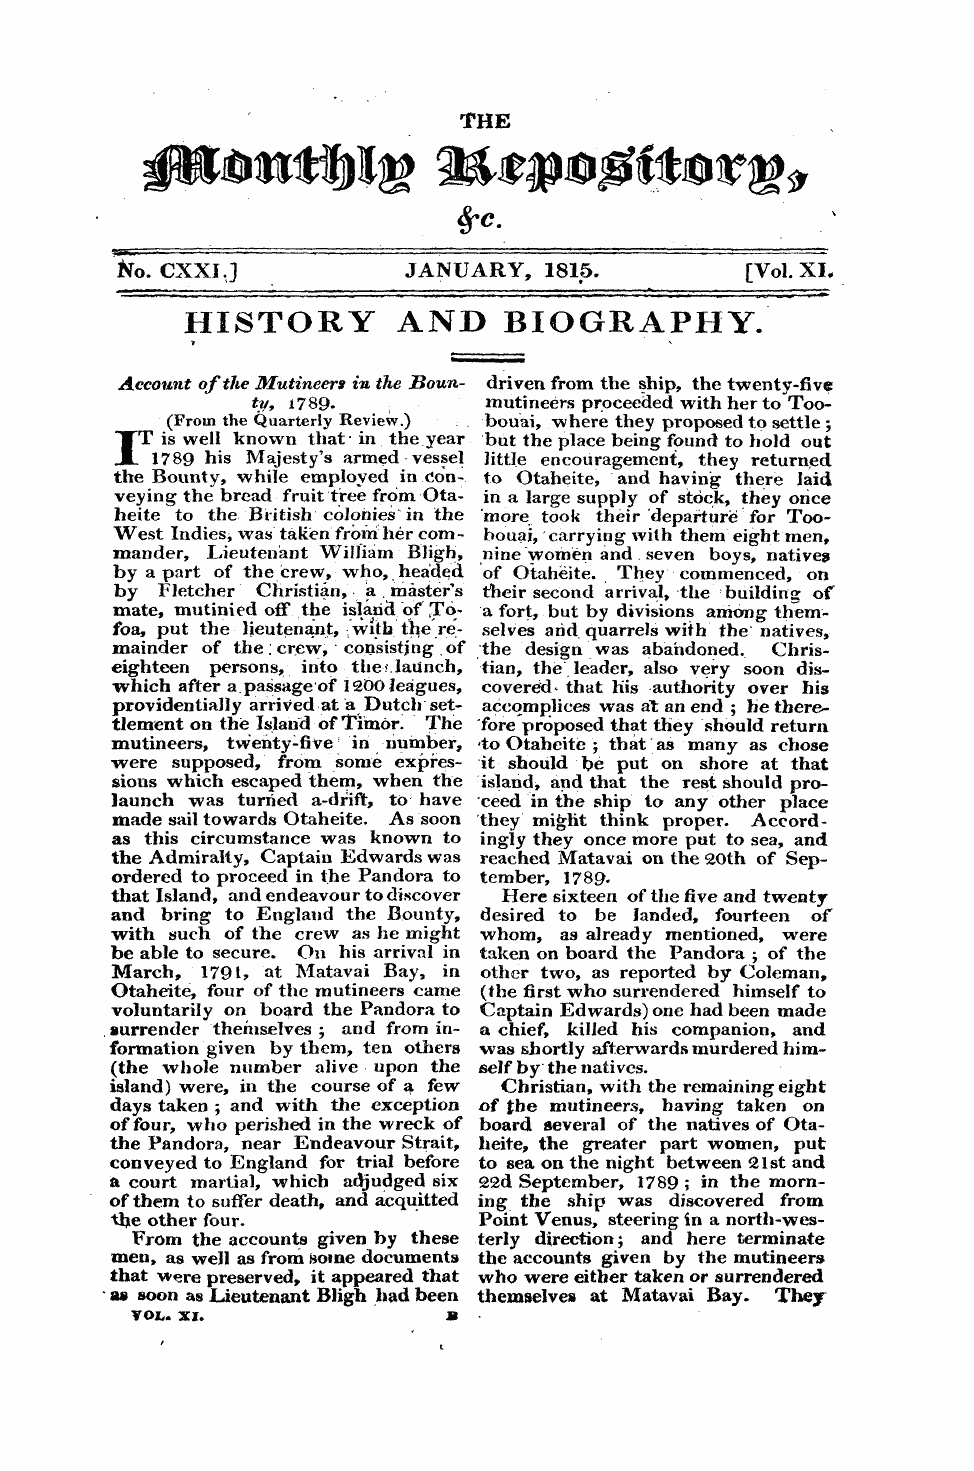 Monthly Repository (1806-1838) and Unitarian Chronicle (1832-1833): F Y, 1st edition - History And Biography. 1 V